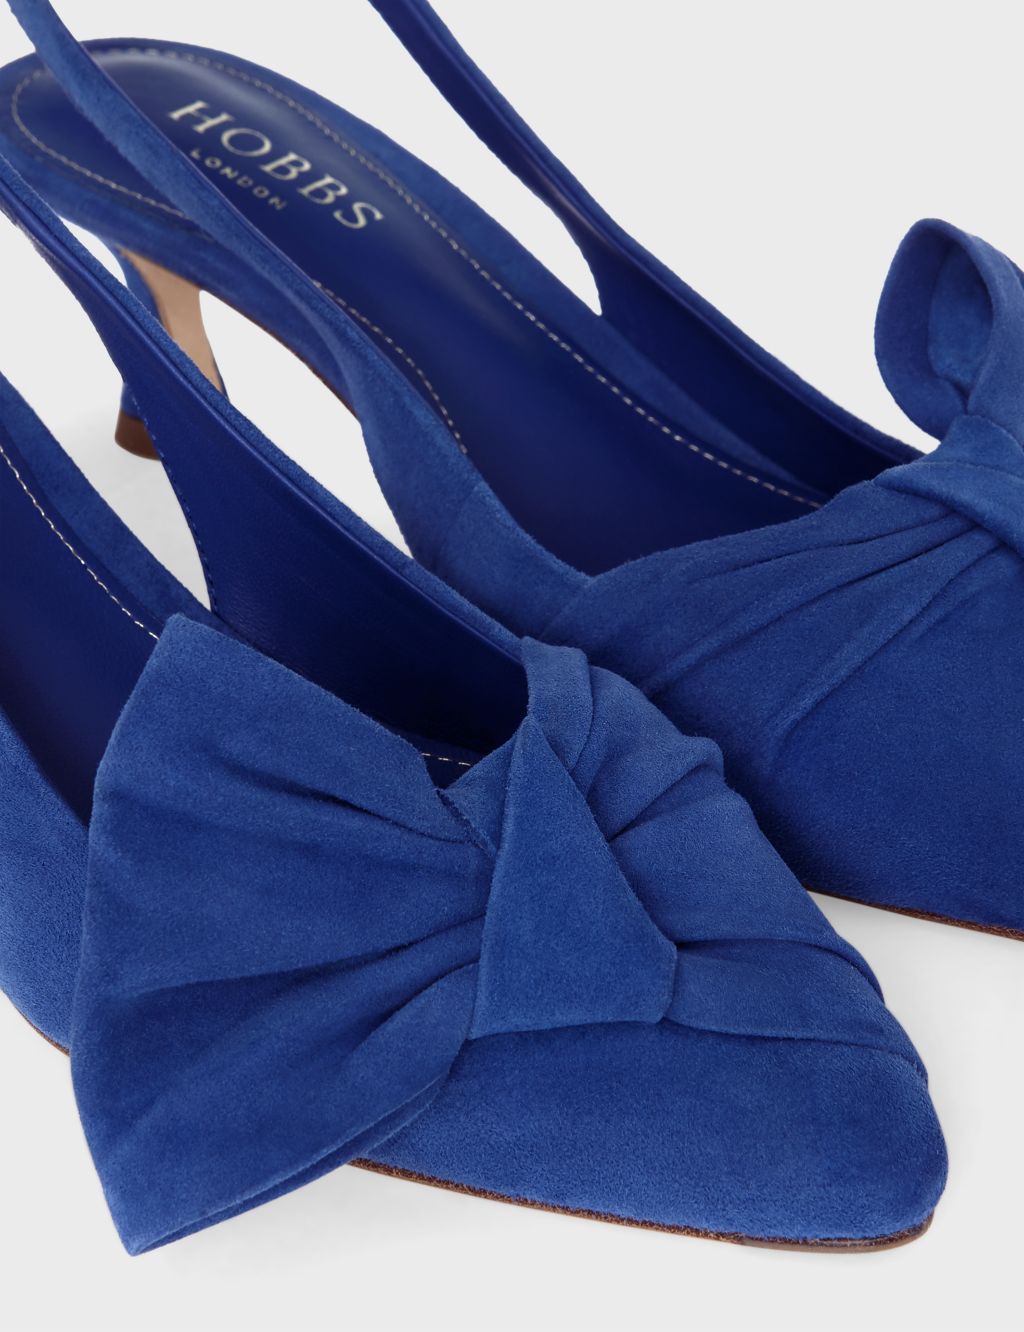 Suede Bow Kitten Heel Slingback Shoes image 4